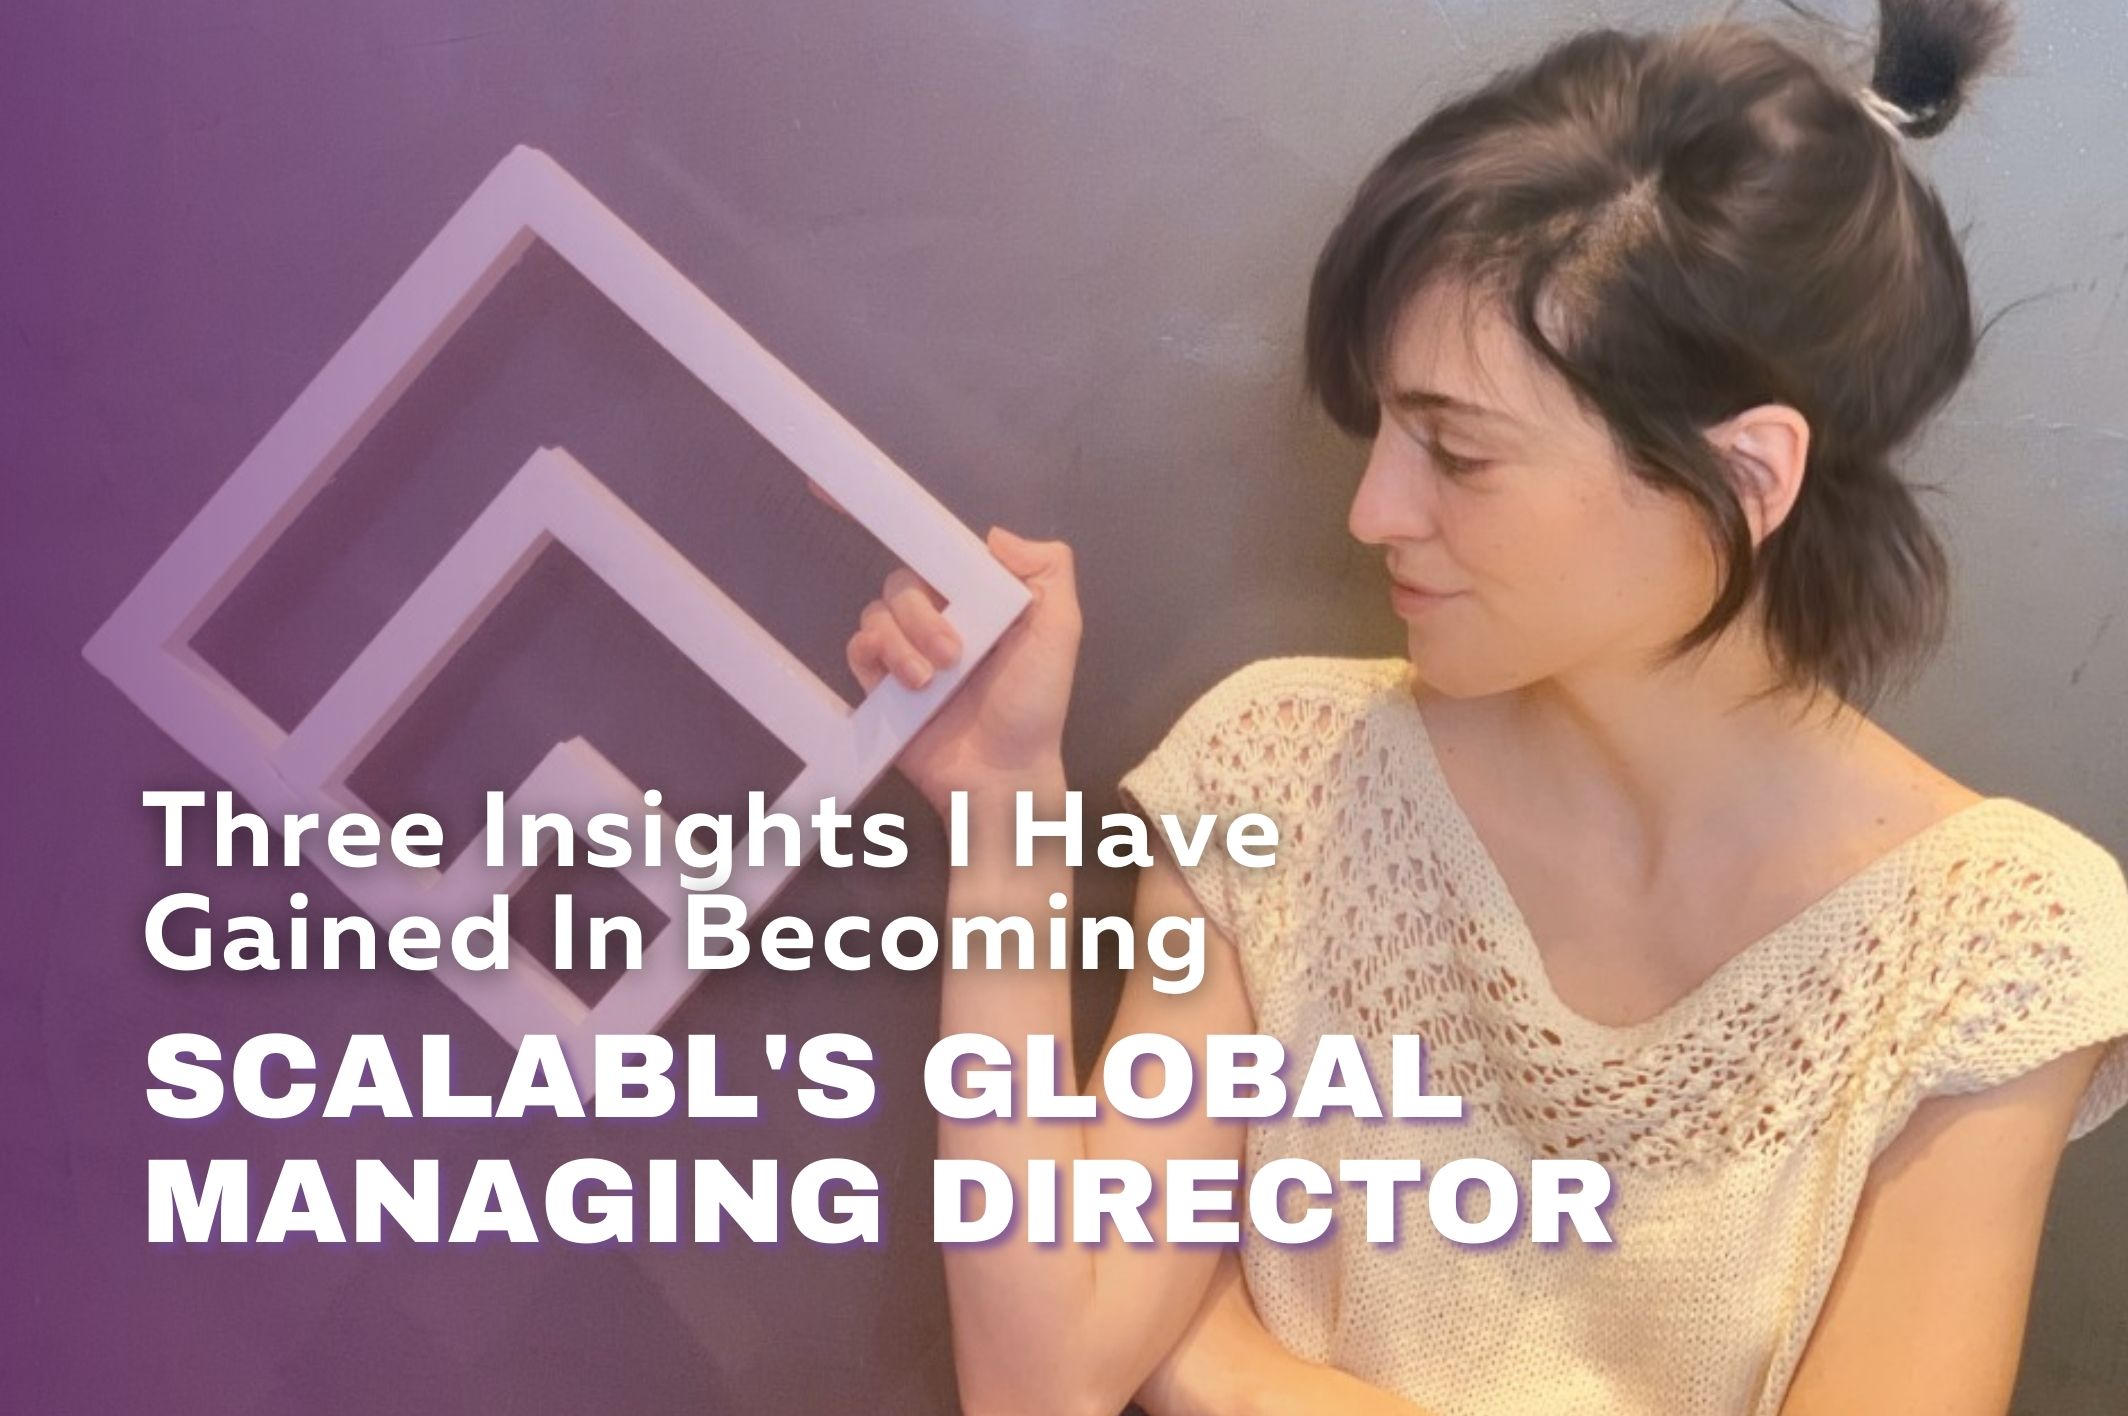 Three Insights I have Gained in becoming Scalabl's Global Managing Director